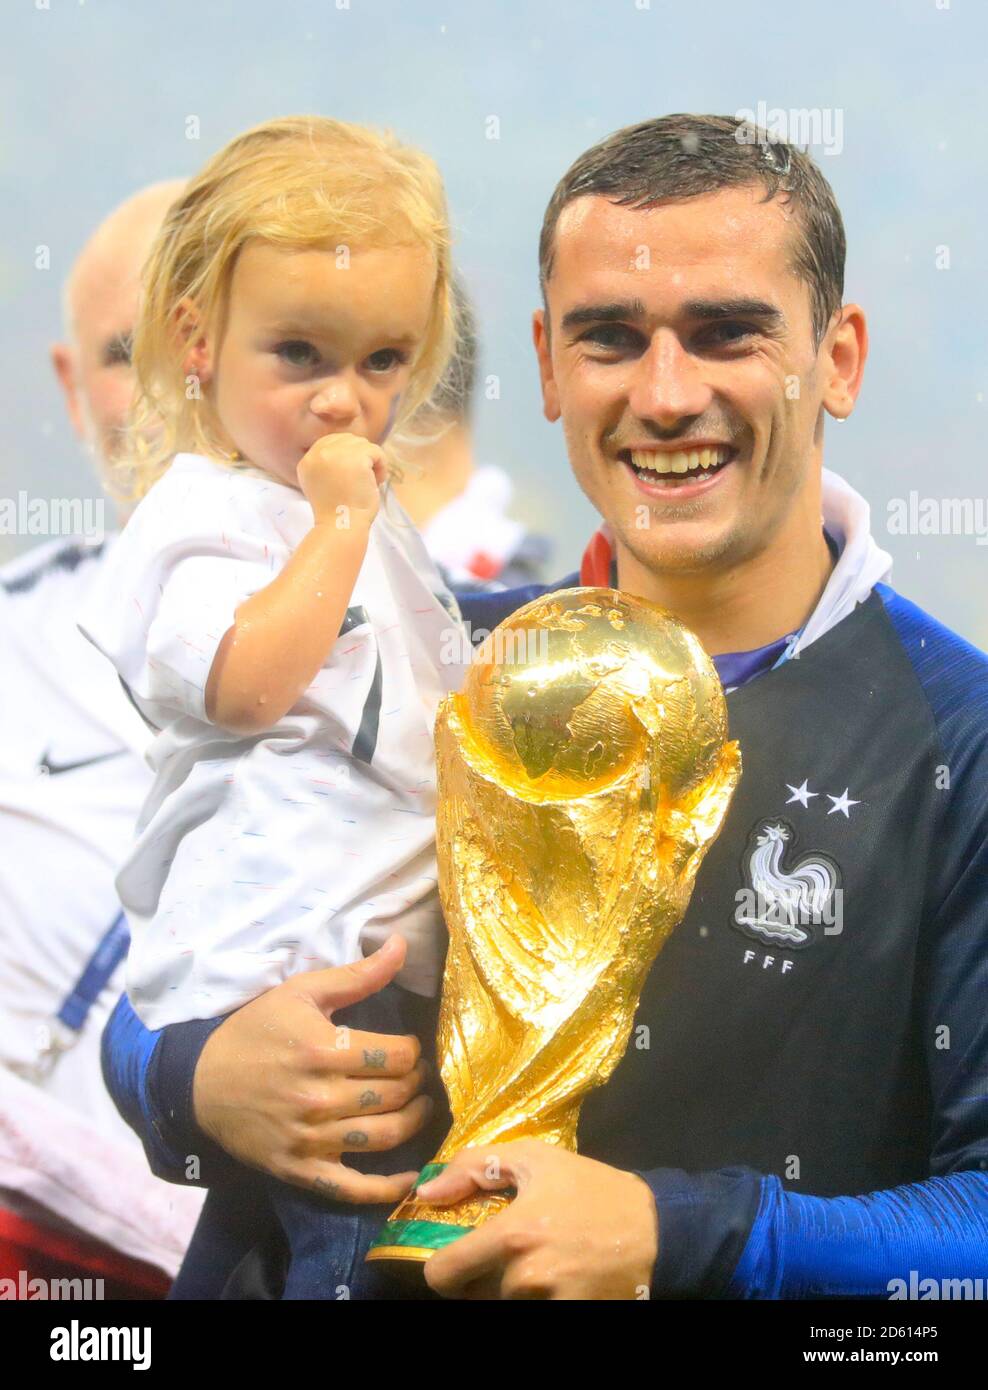 Mia Griezmann High Resolution Stock Photography and Images - Alamy